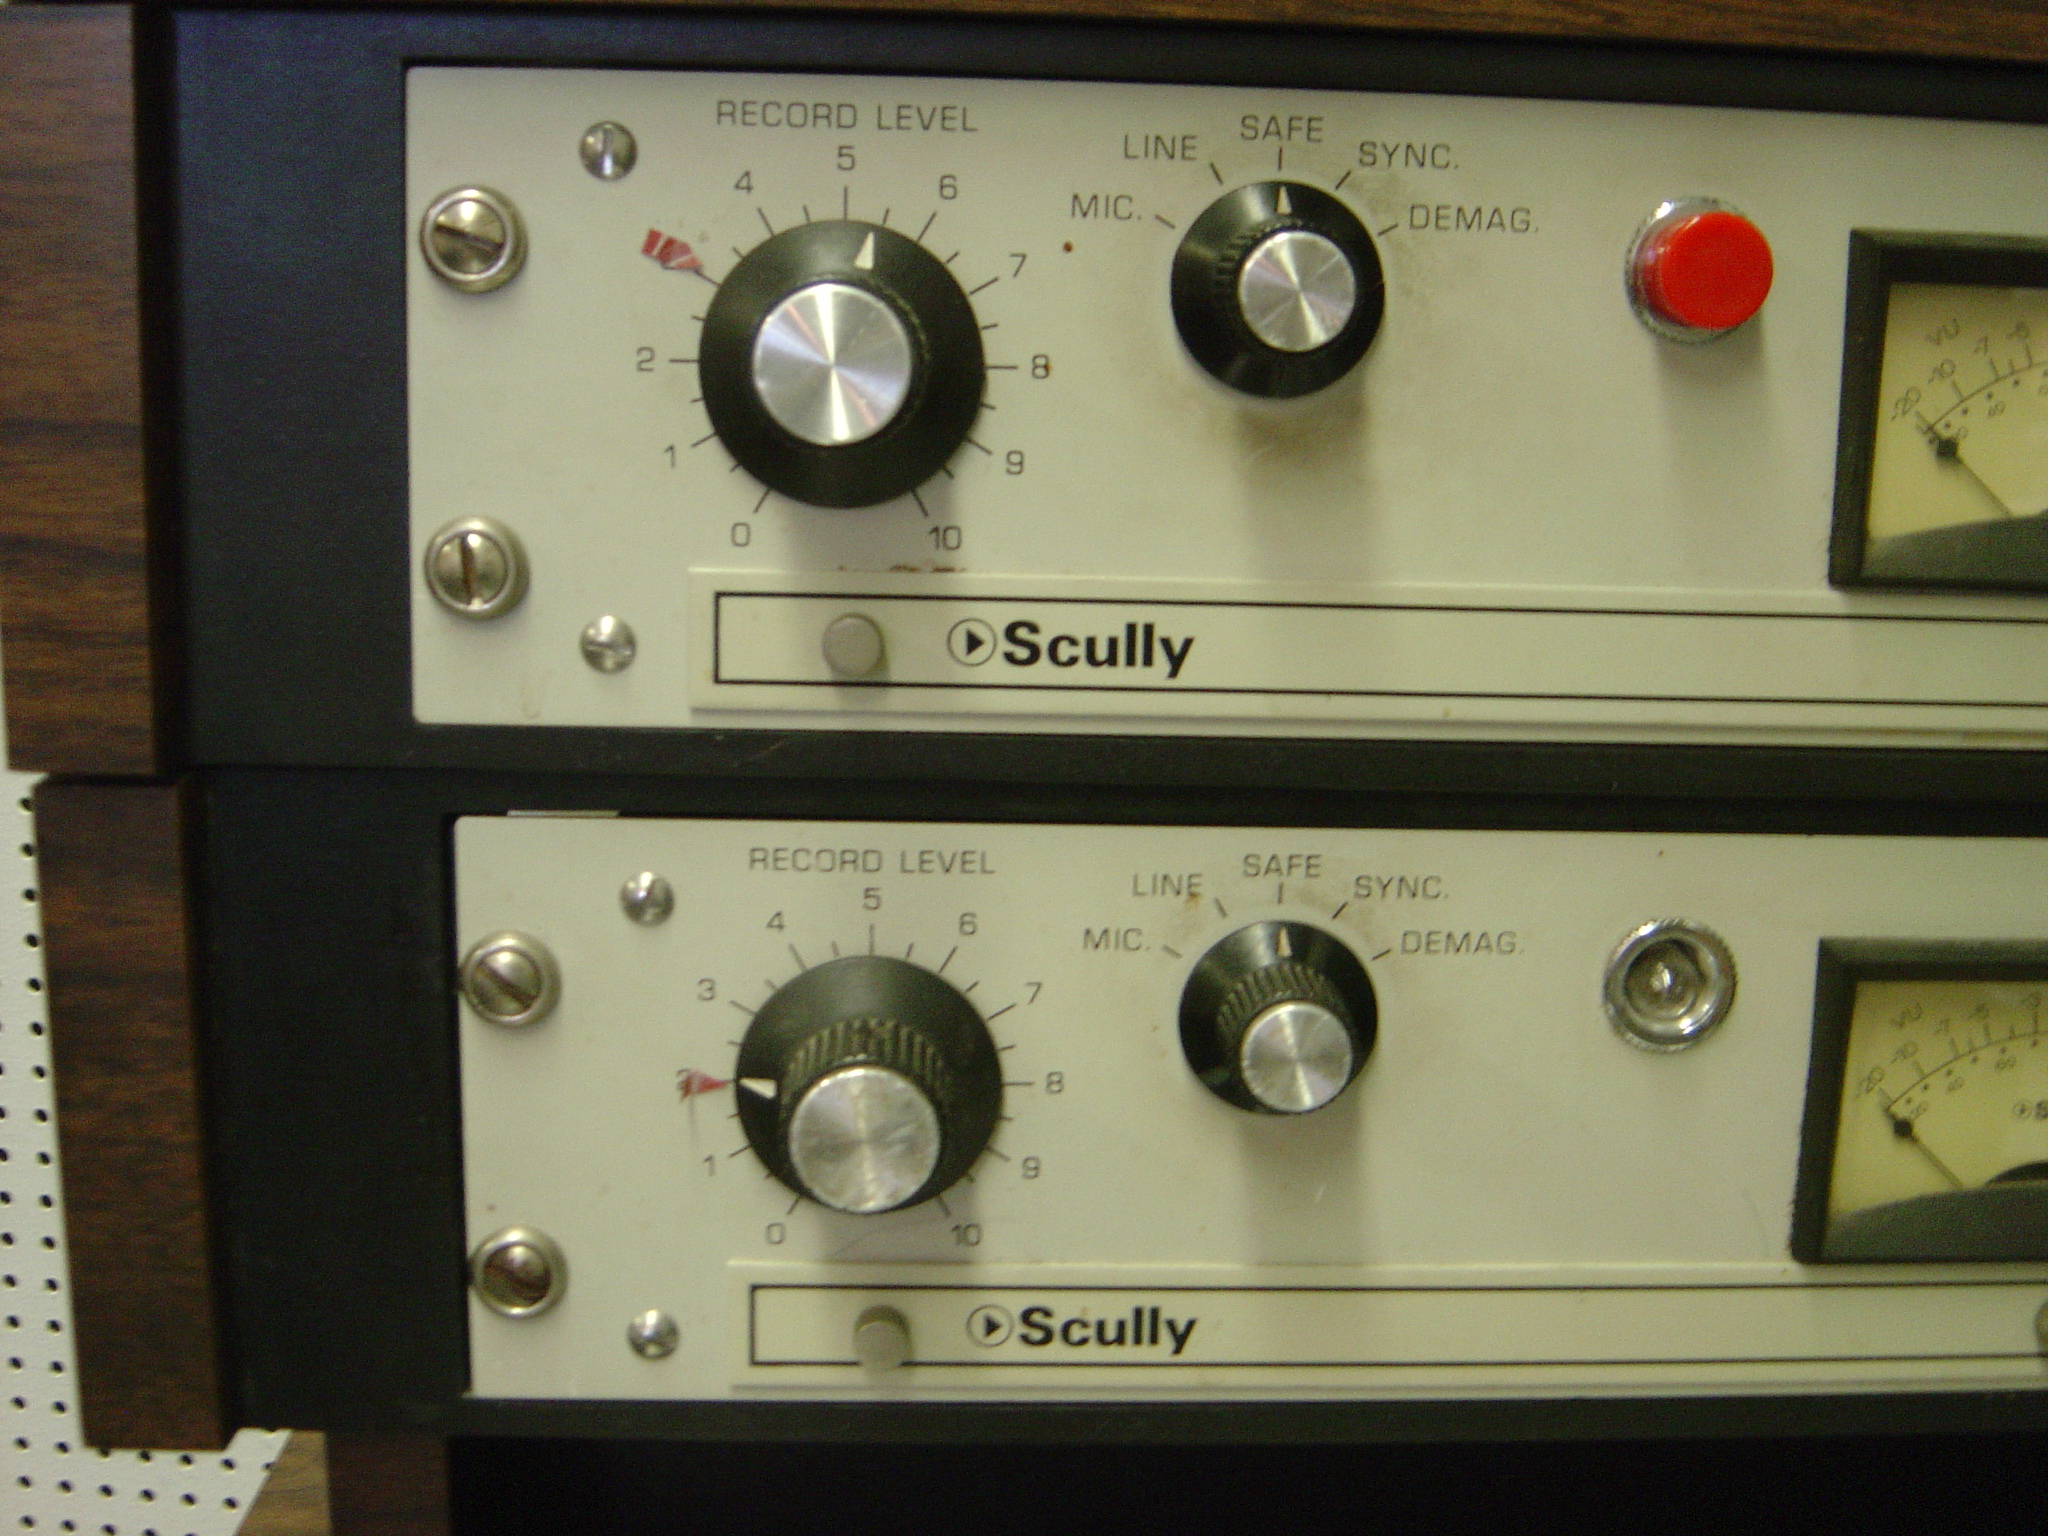 2004 - The Scully Workhorse Tape machine - About to be removed from service.